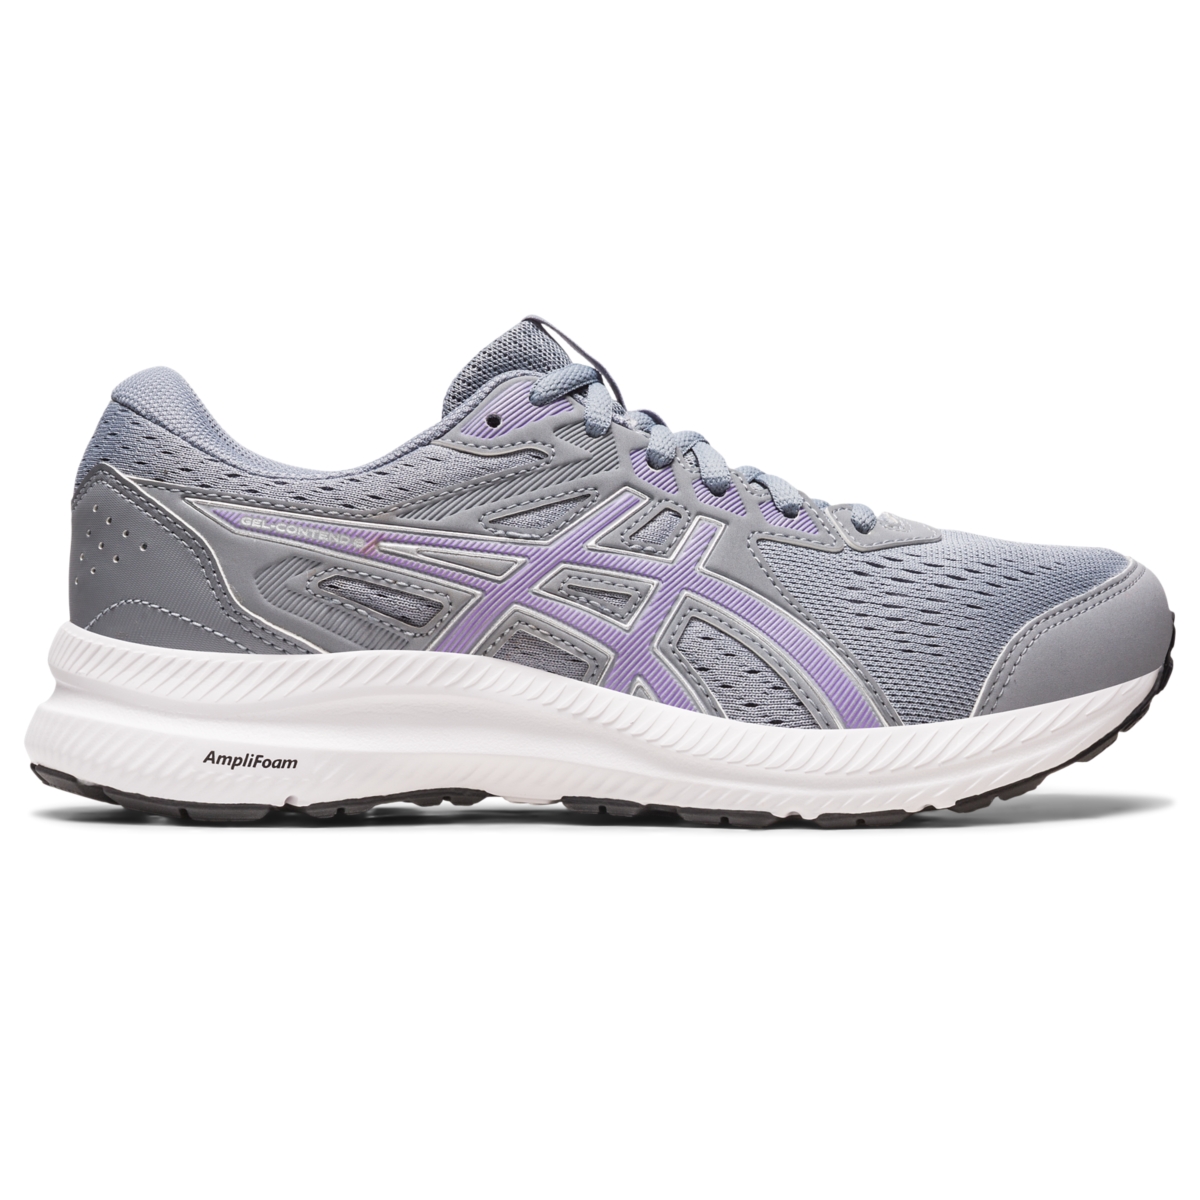 ASICS Gel contend 8. ASICS Gel contend 6. Gel-contend 8 ASICS Color: Rain Forest/White. Gel-contend 8 Piedmont Grey/Frosted Rose.